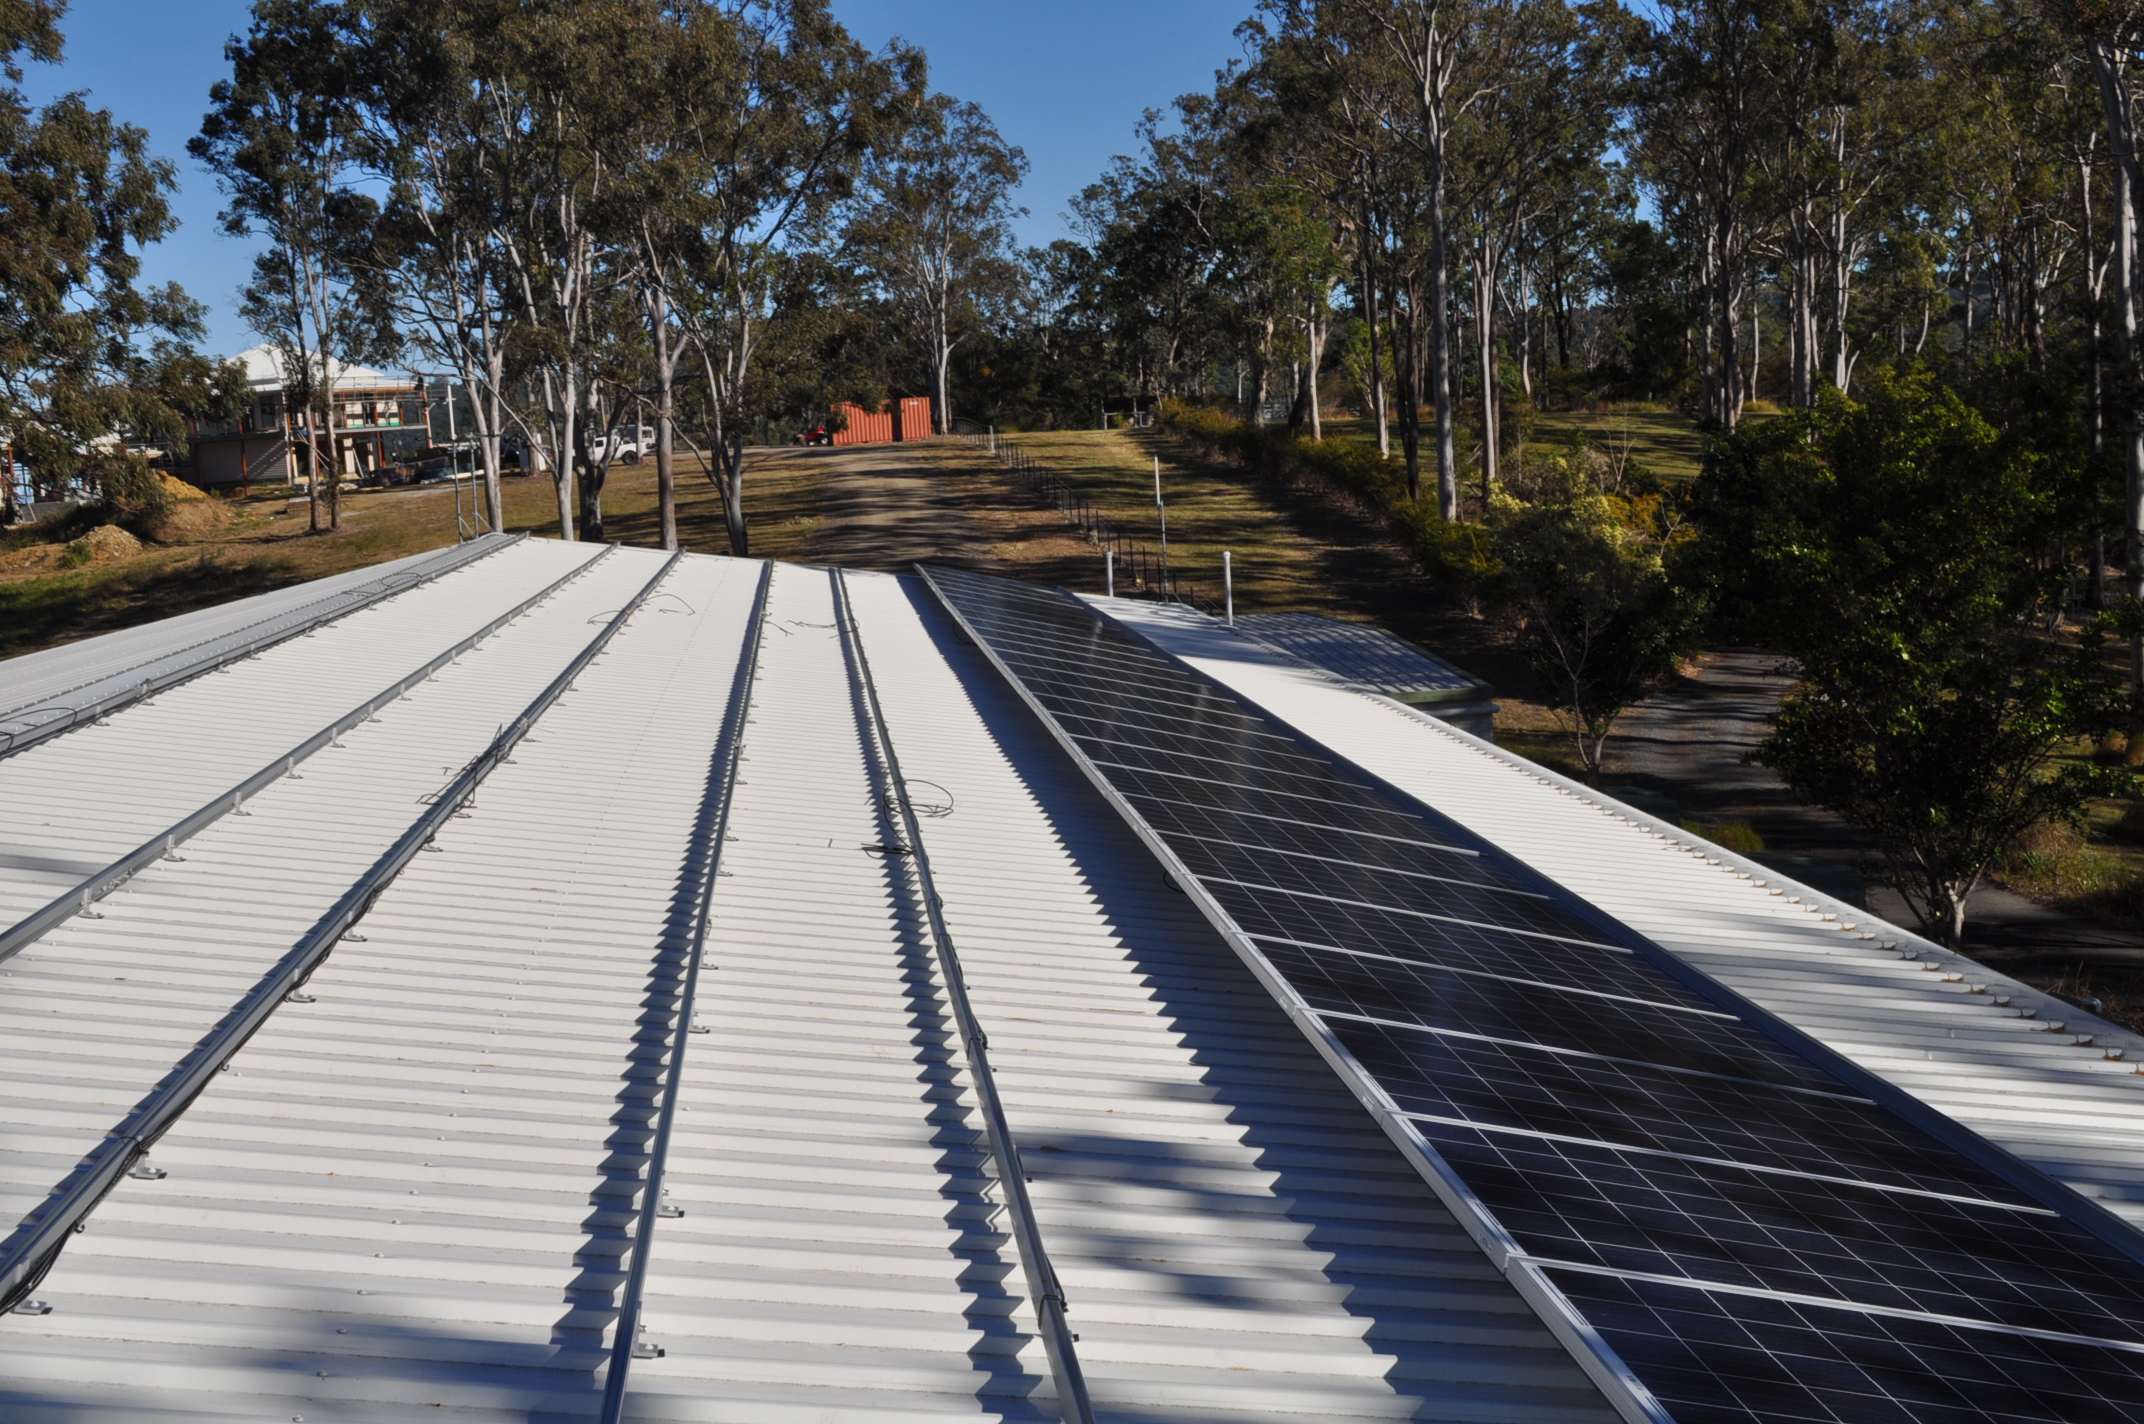 First row of solar panels installed